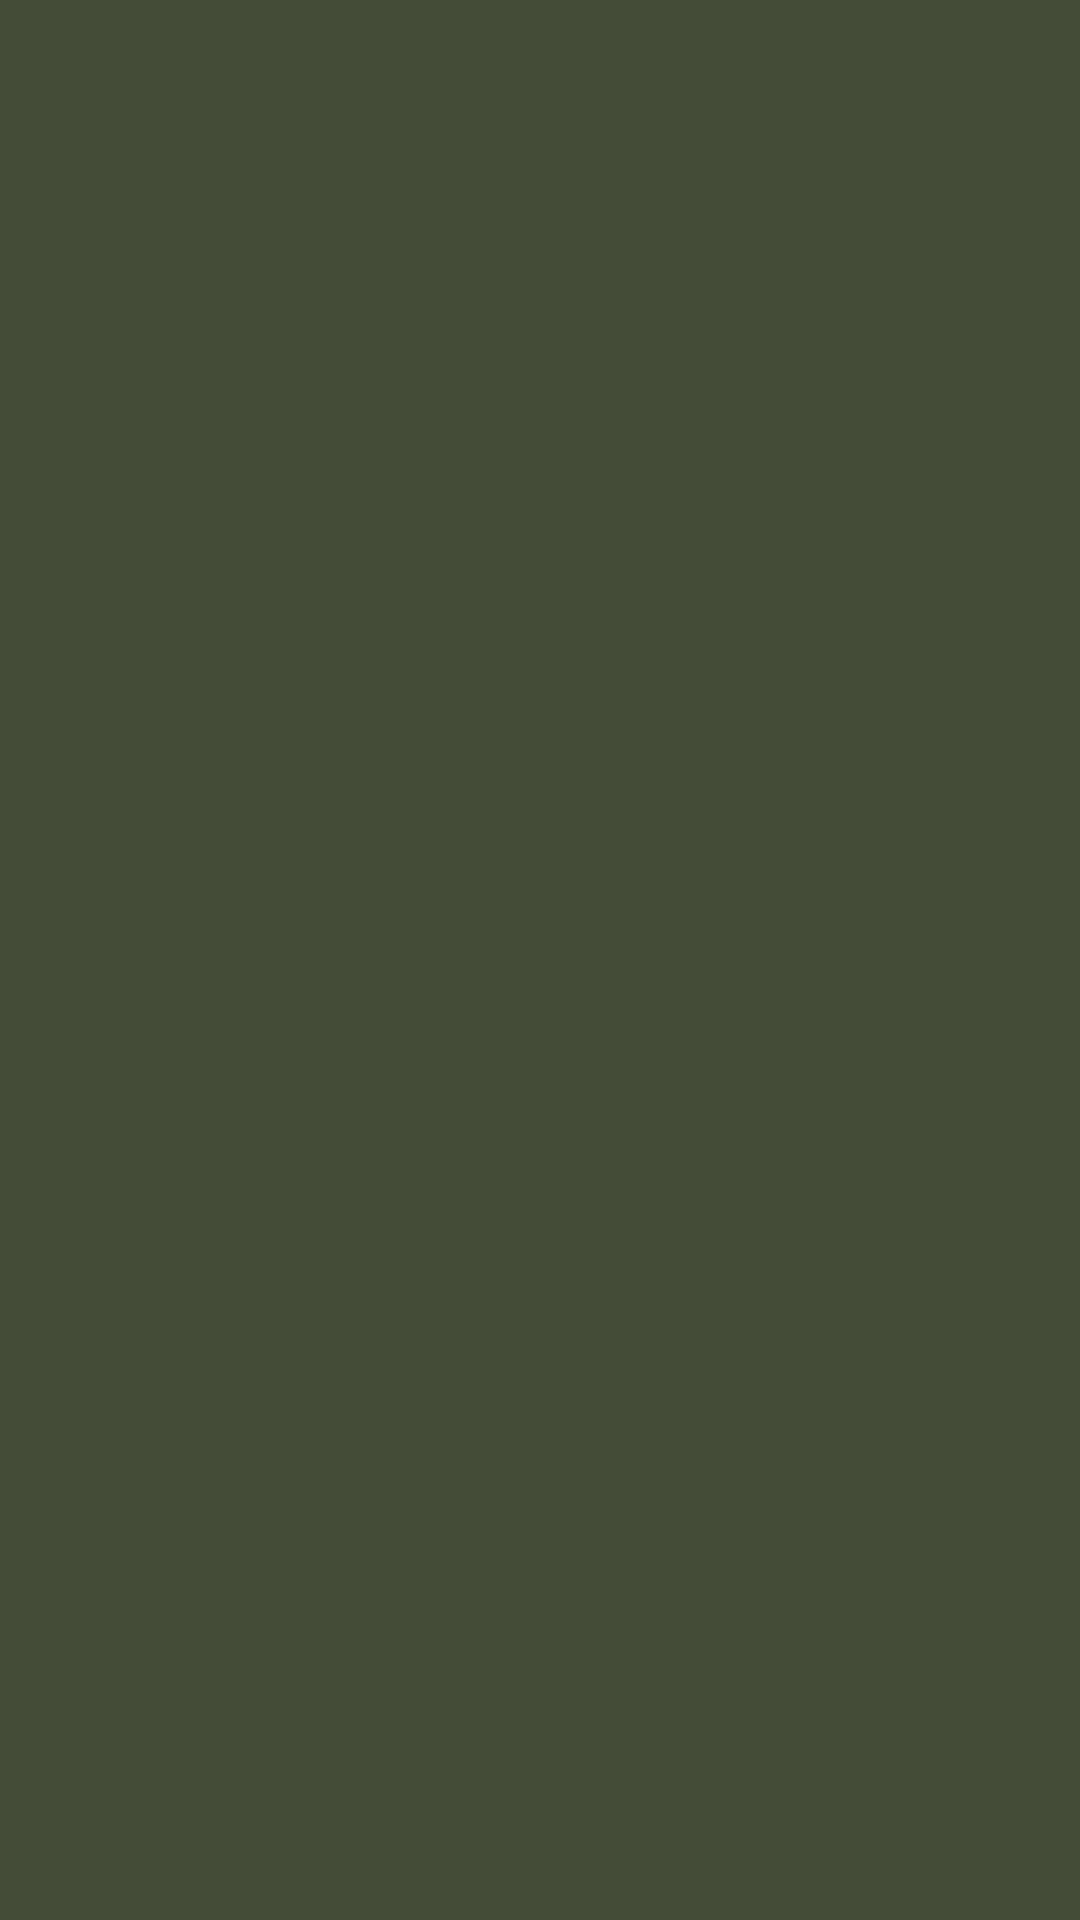 1080x1920 Rifle Green Solid Color Background